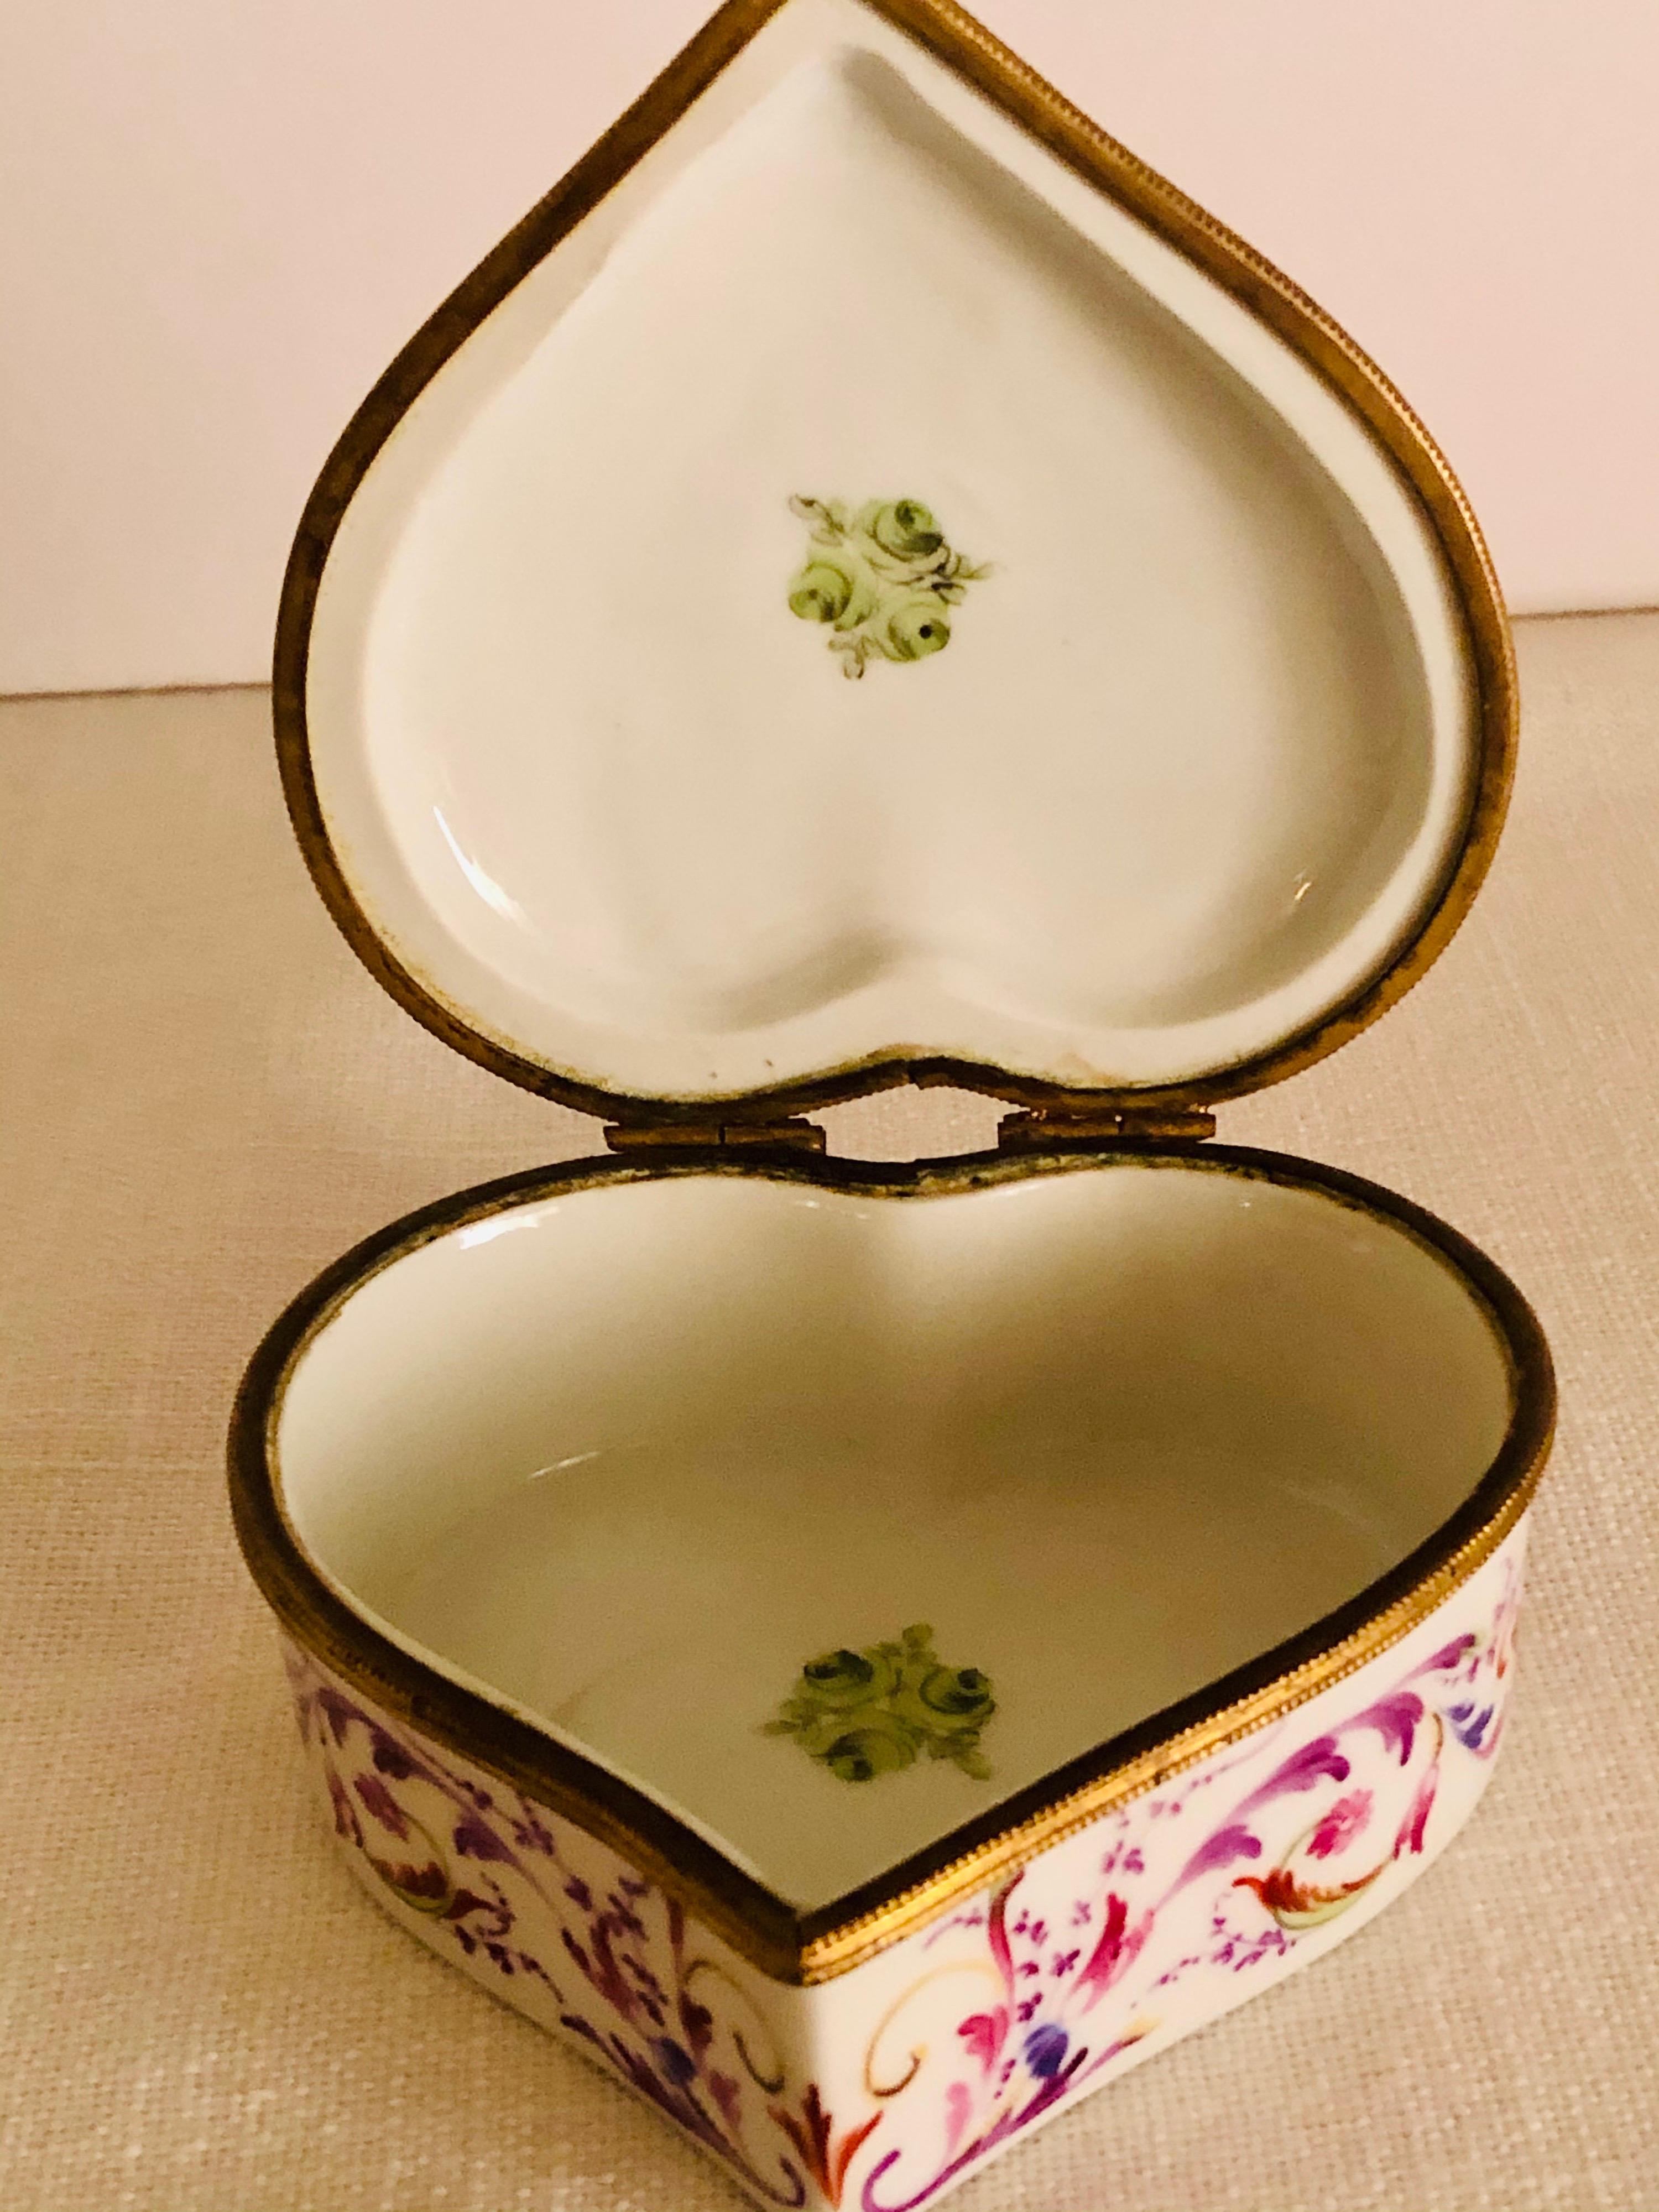 Le Tallec Heart Shape Box Hand-Painted with a Colorful Arabesque Decoration For Sale 2